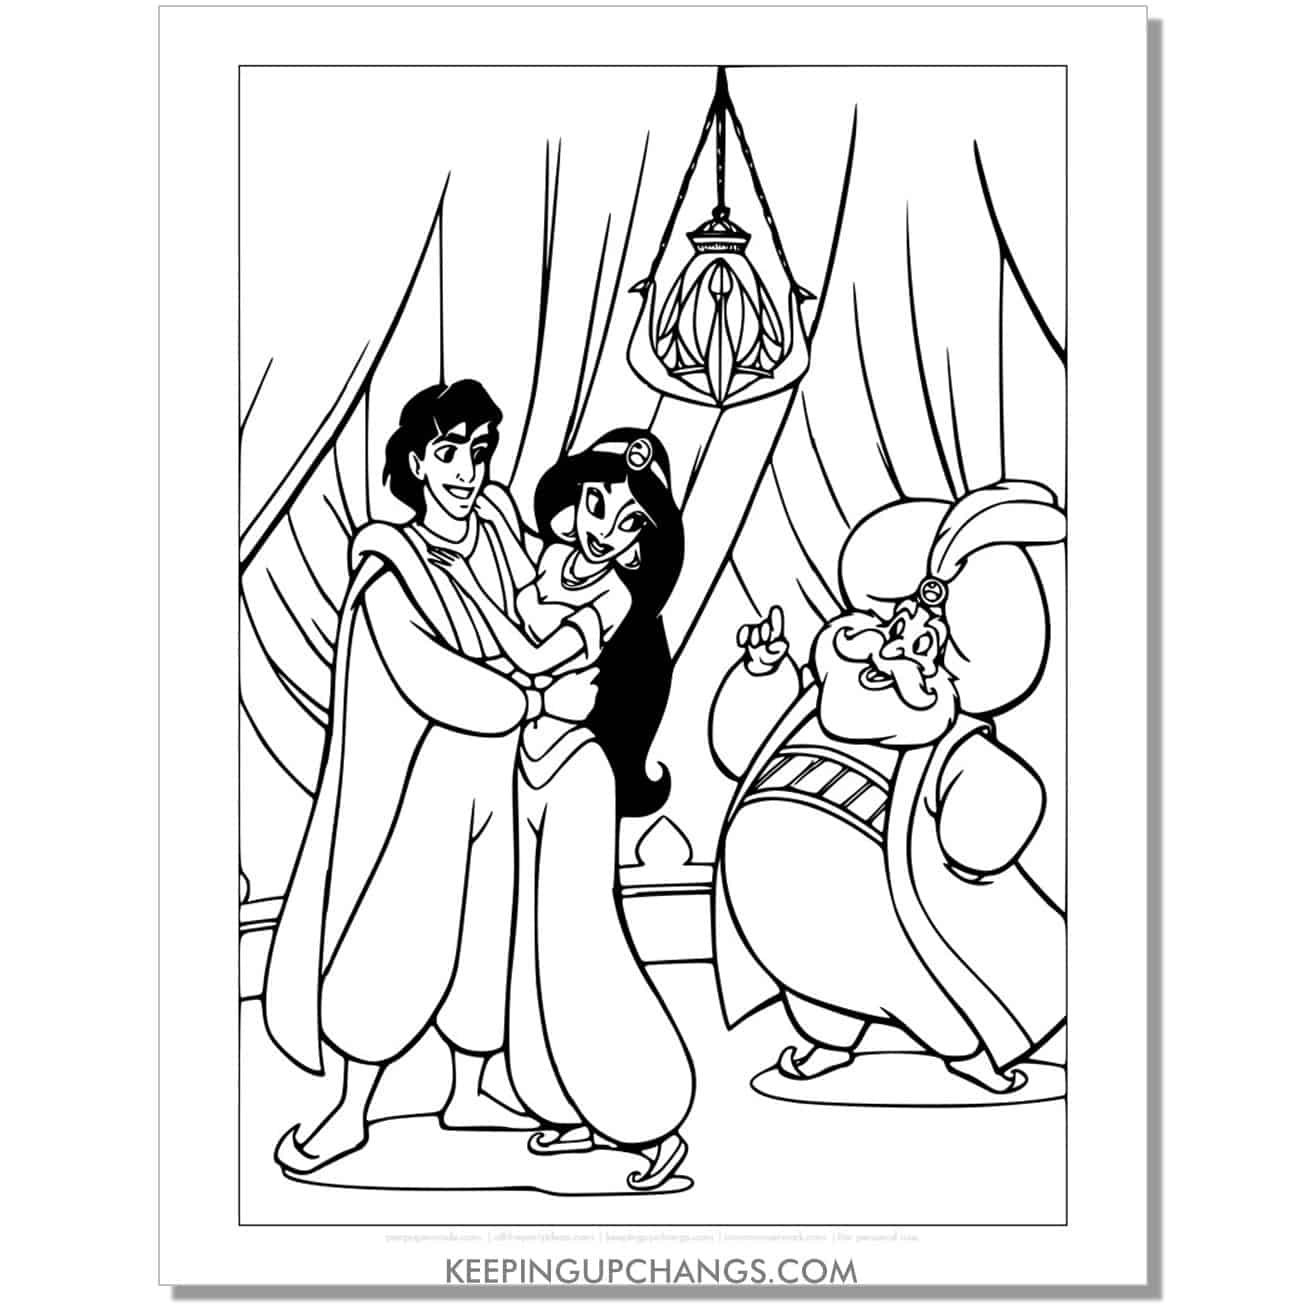 jasmine and aladdin with sultan happy ending with coloring page, sheet.